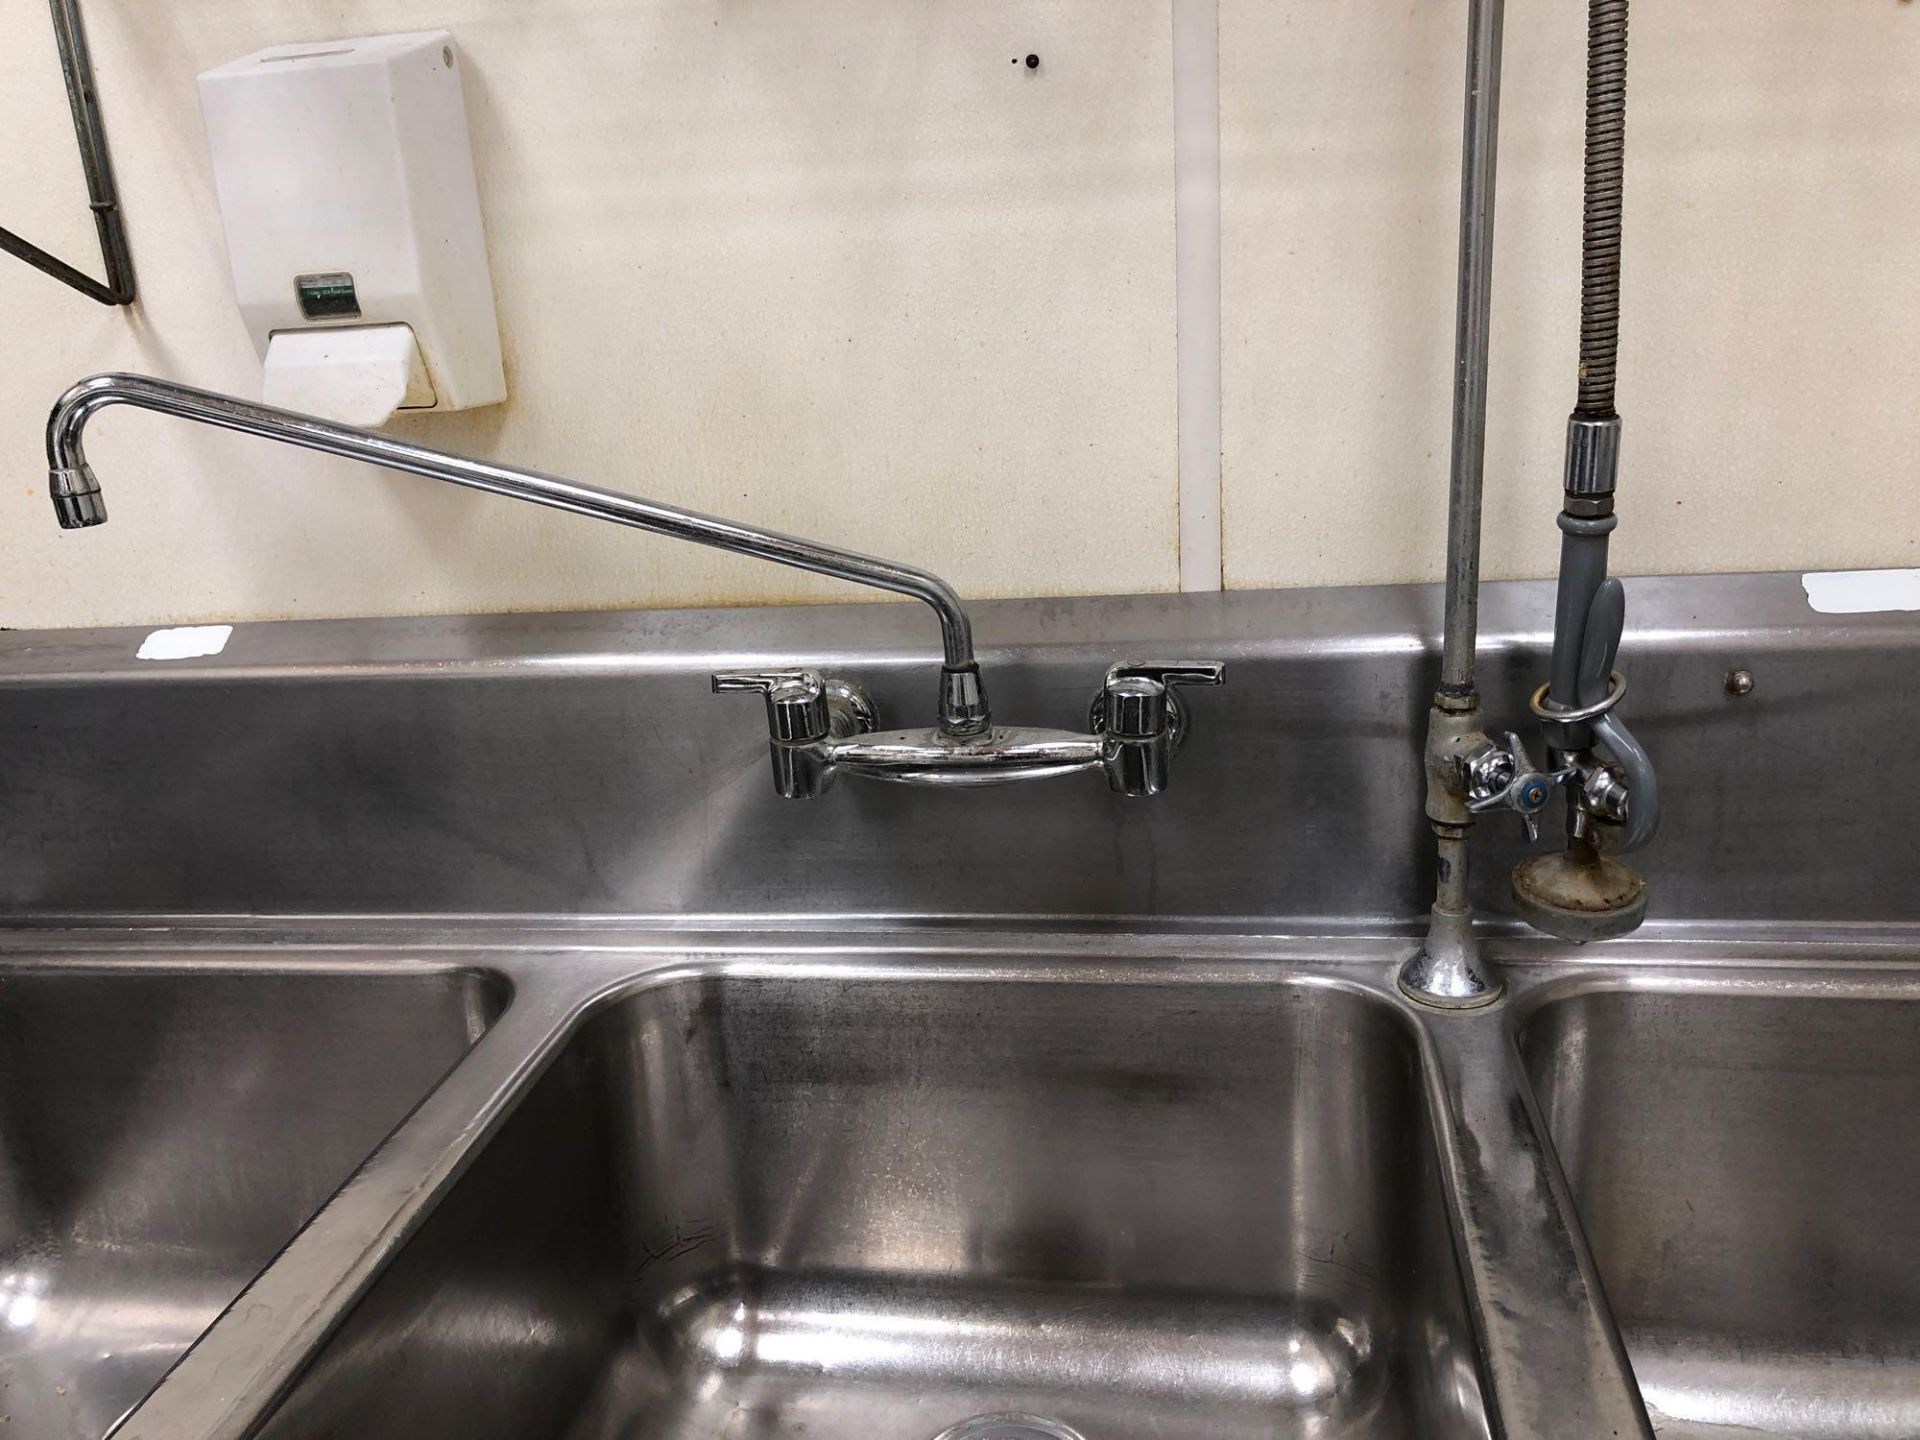 Advance 3 Compartment Stainless Steel Sink - Image 3 of 3